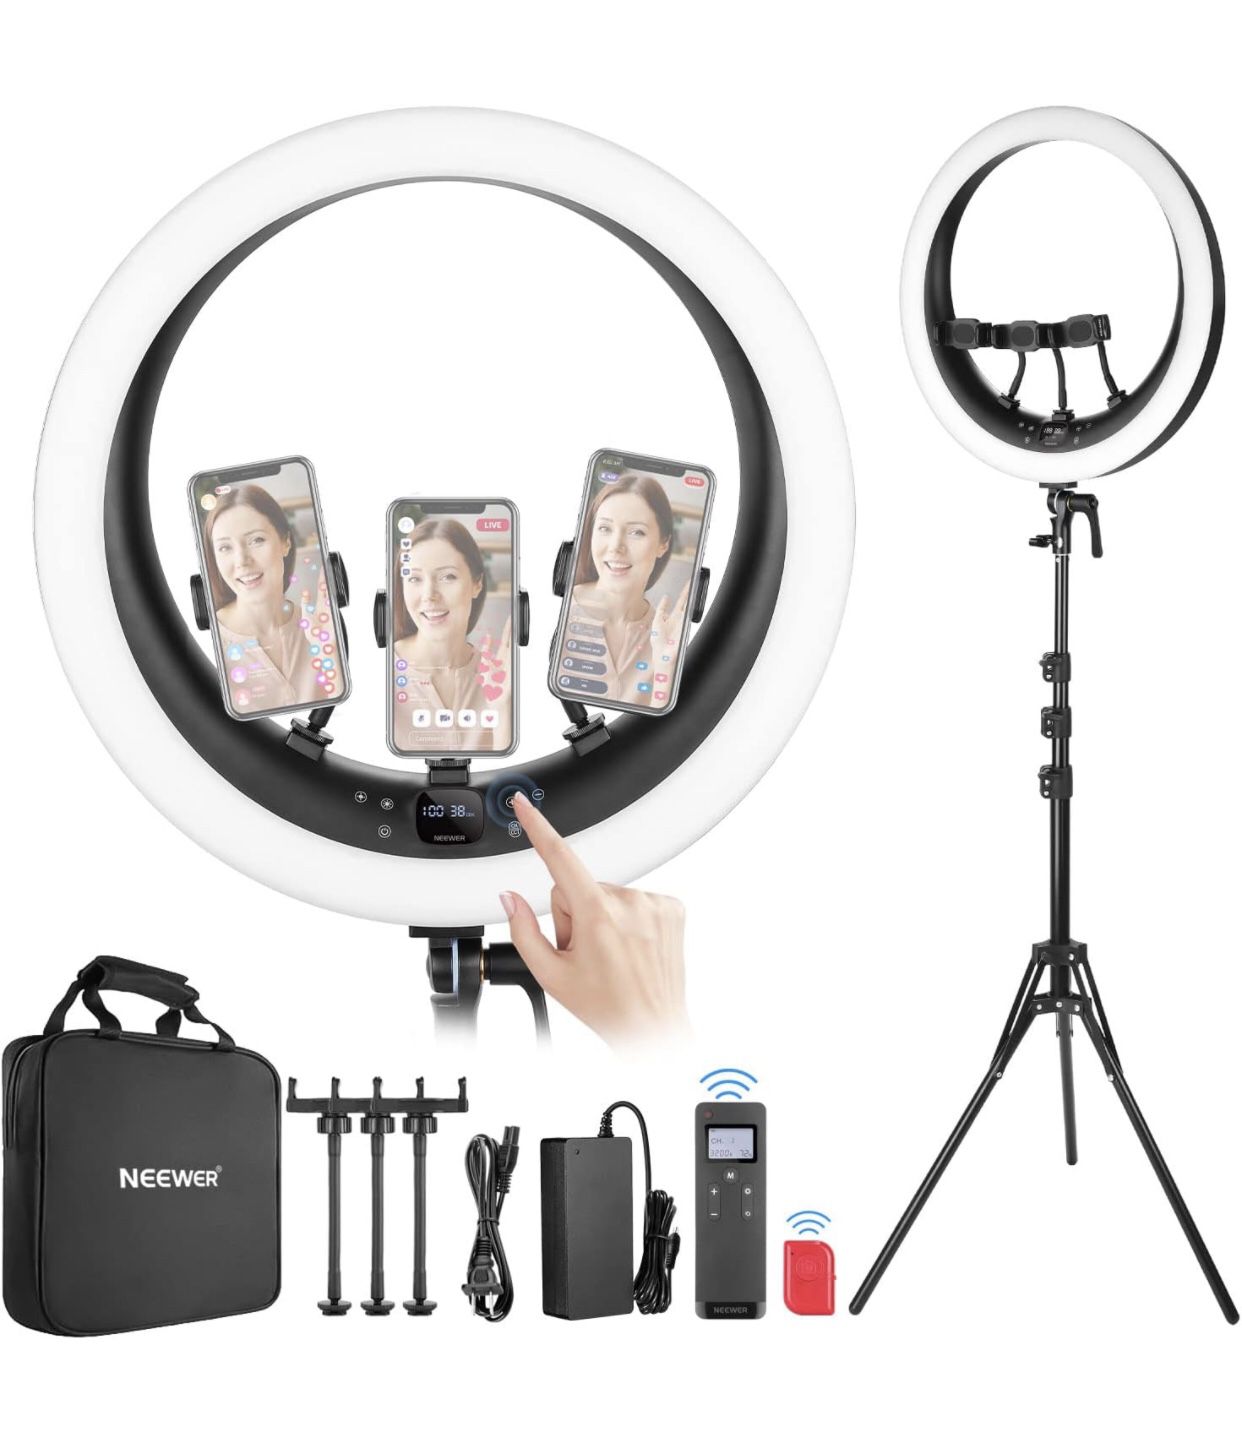 NEW! NEEWER Ring Light RP19H 19 inch with Stand and 3 Phone Holders, Upgraded 2.4G and Touch Control